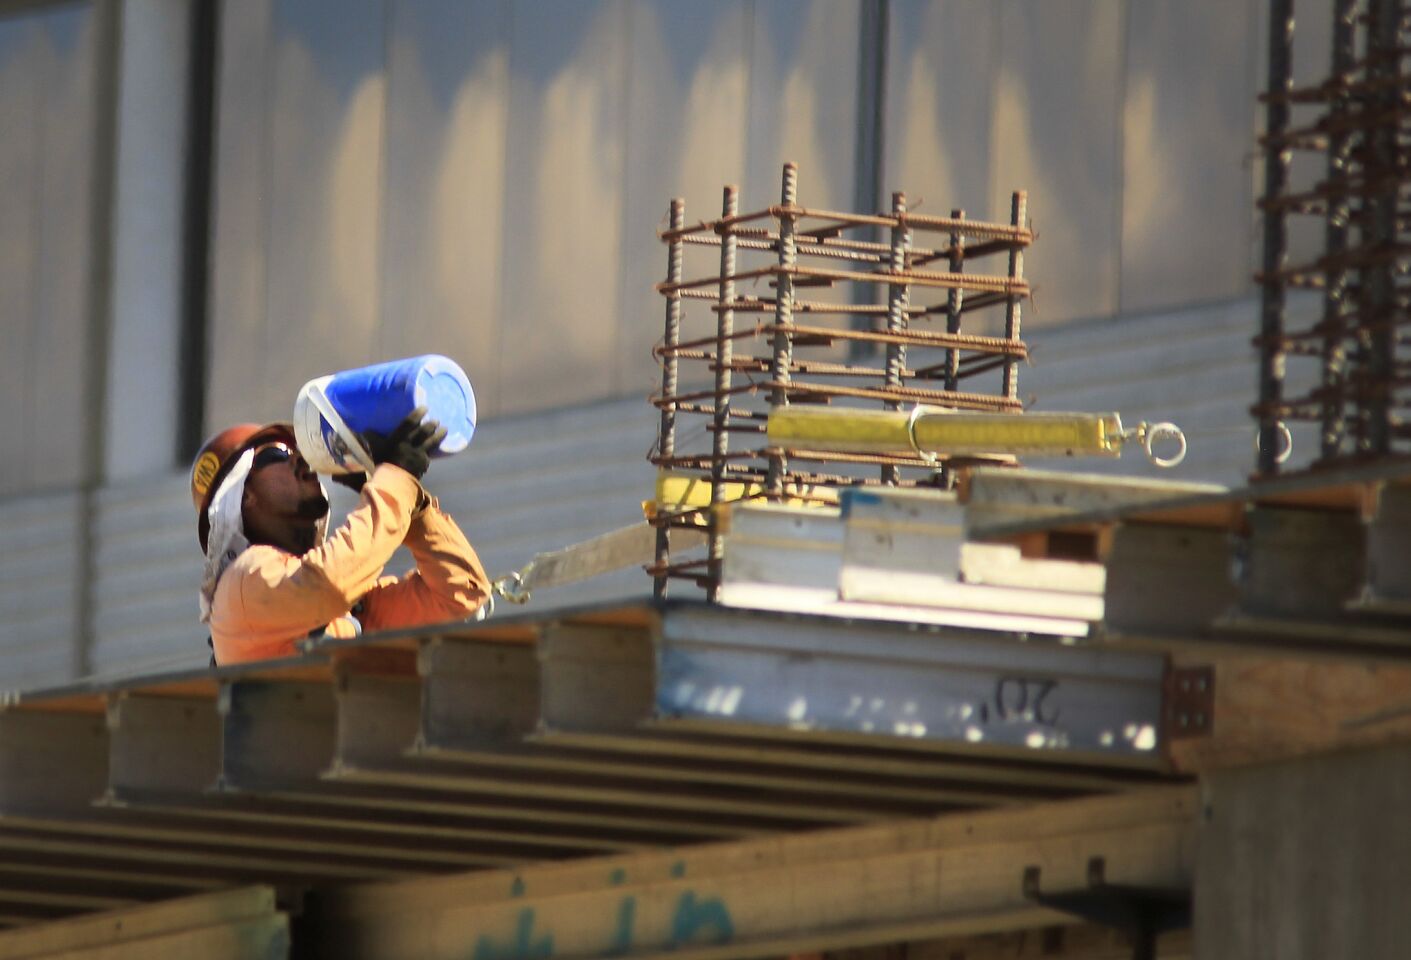 A construction worker takes a long drink from a insulated jug while taking a break at The Village, under construction at Westfield Topanga in Woodland Hills.